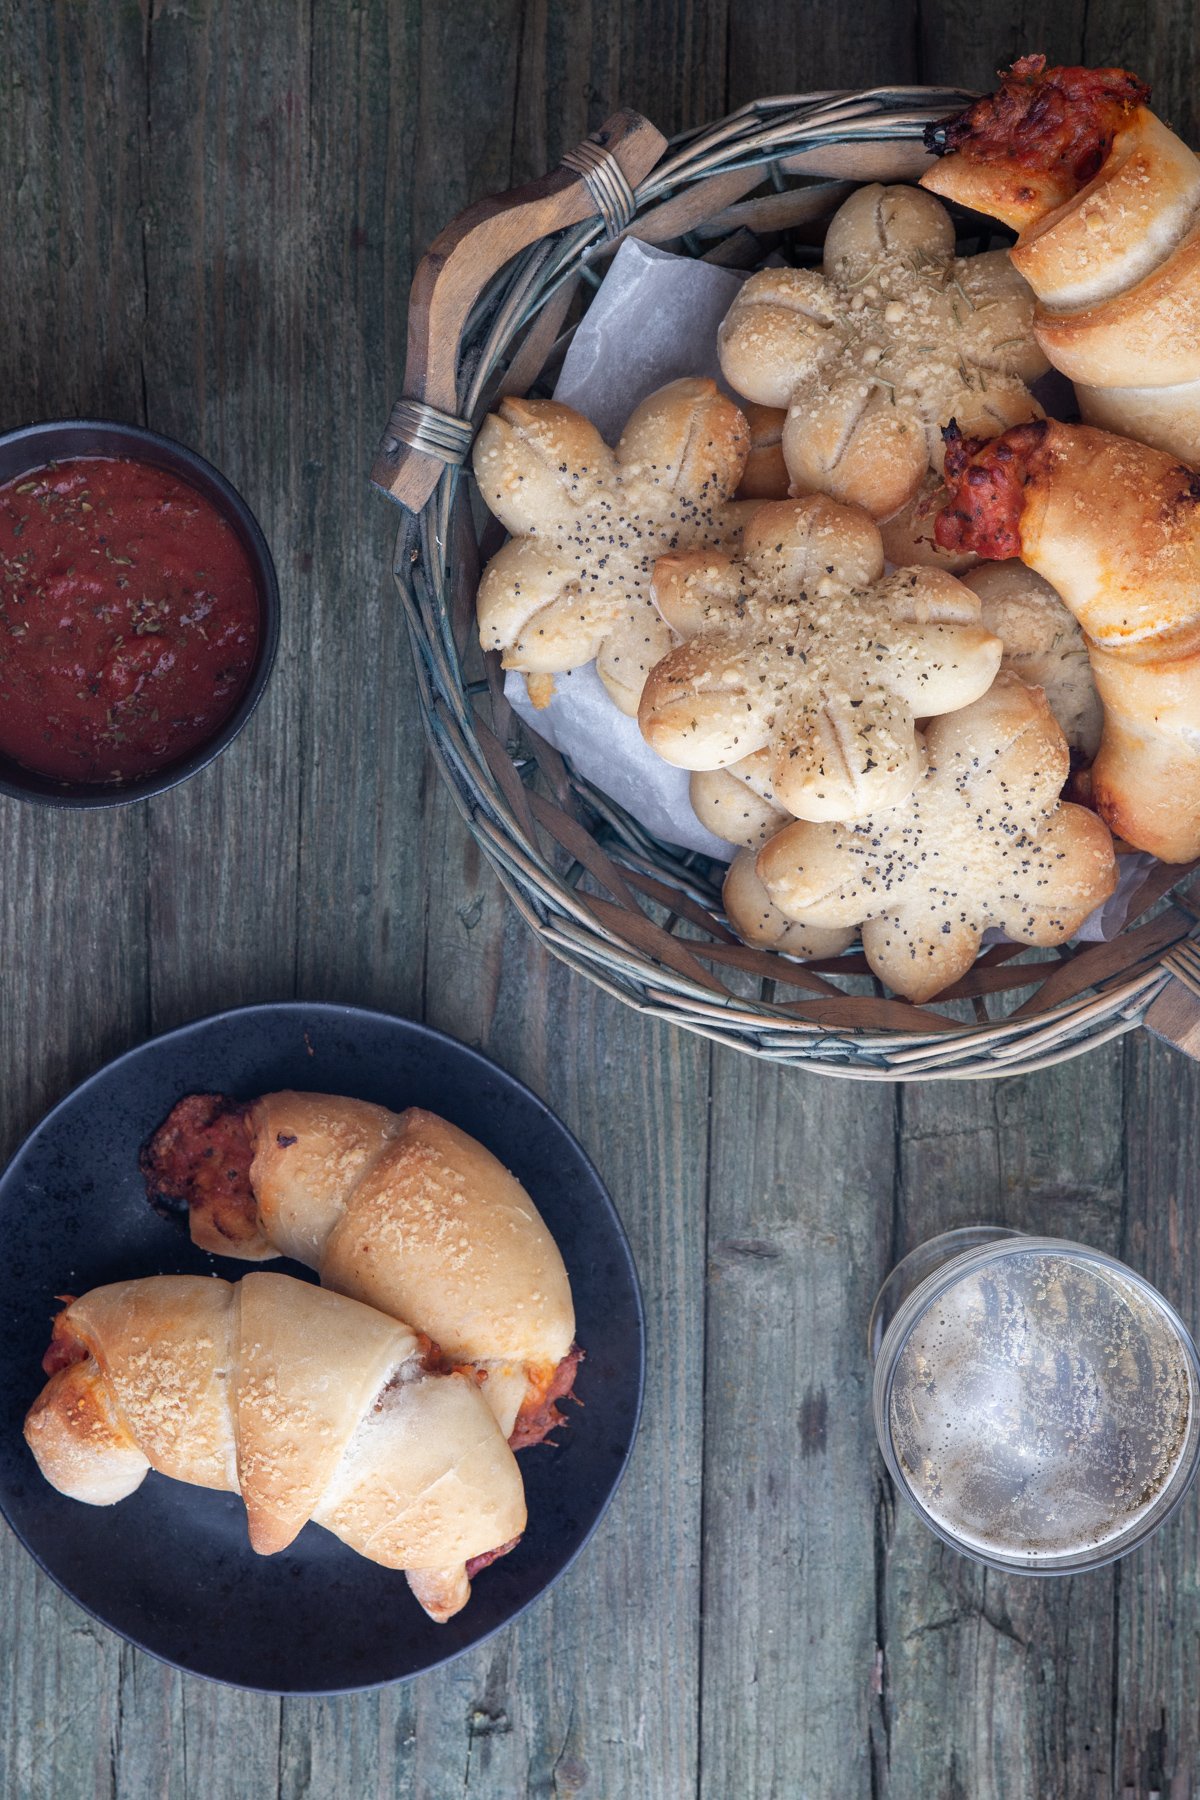 Pizza ideas, crescents and starts in a basket and on a black plate.